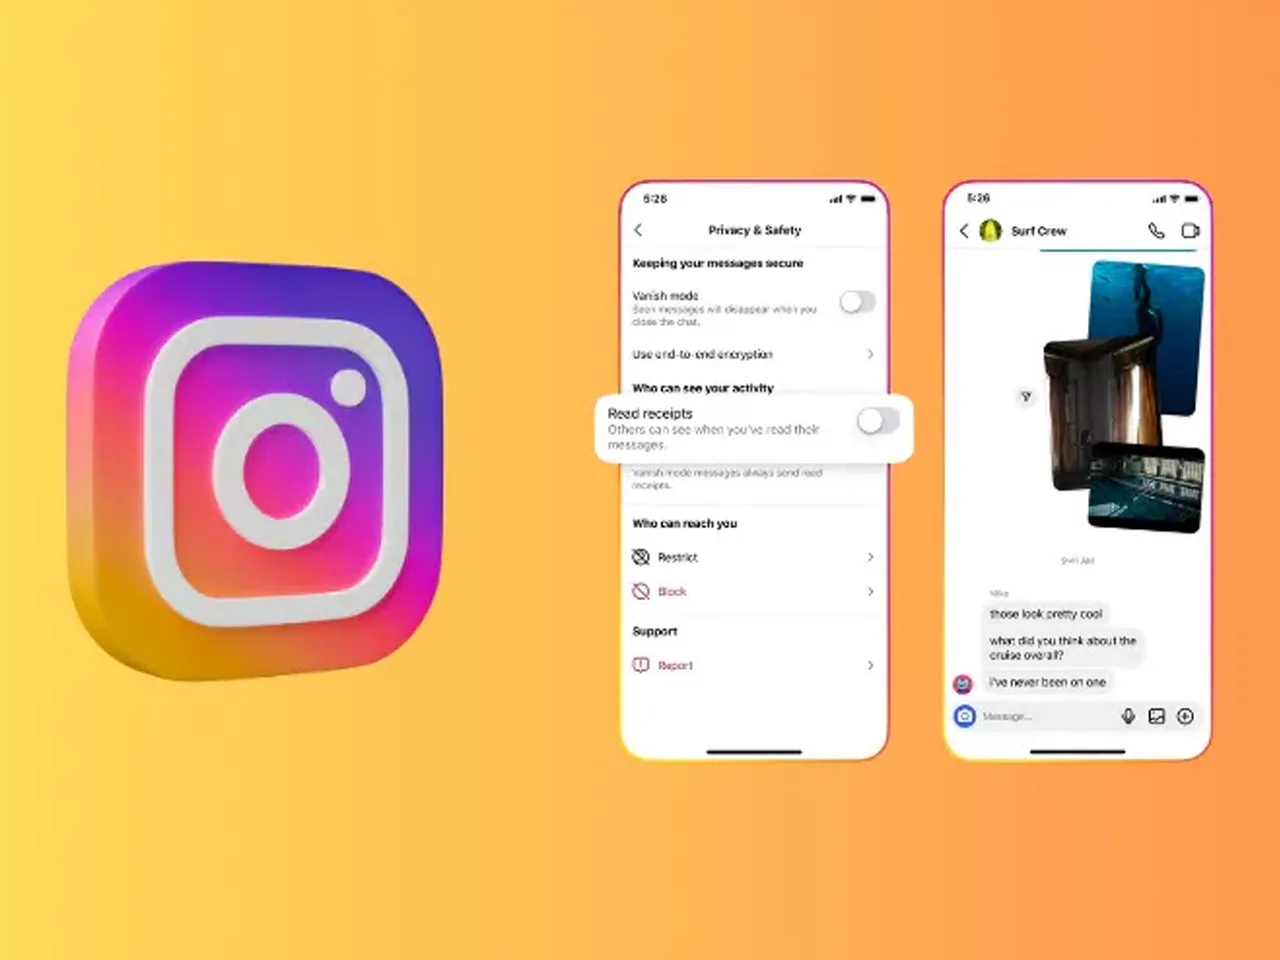 Instagram users can now disable read receipts in DMs